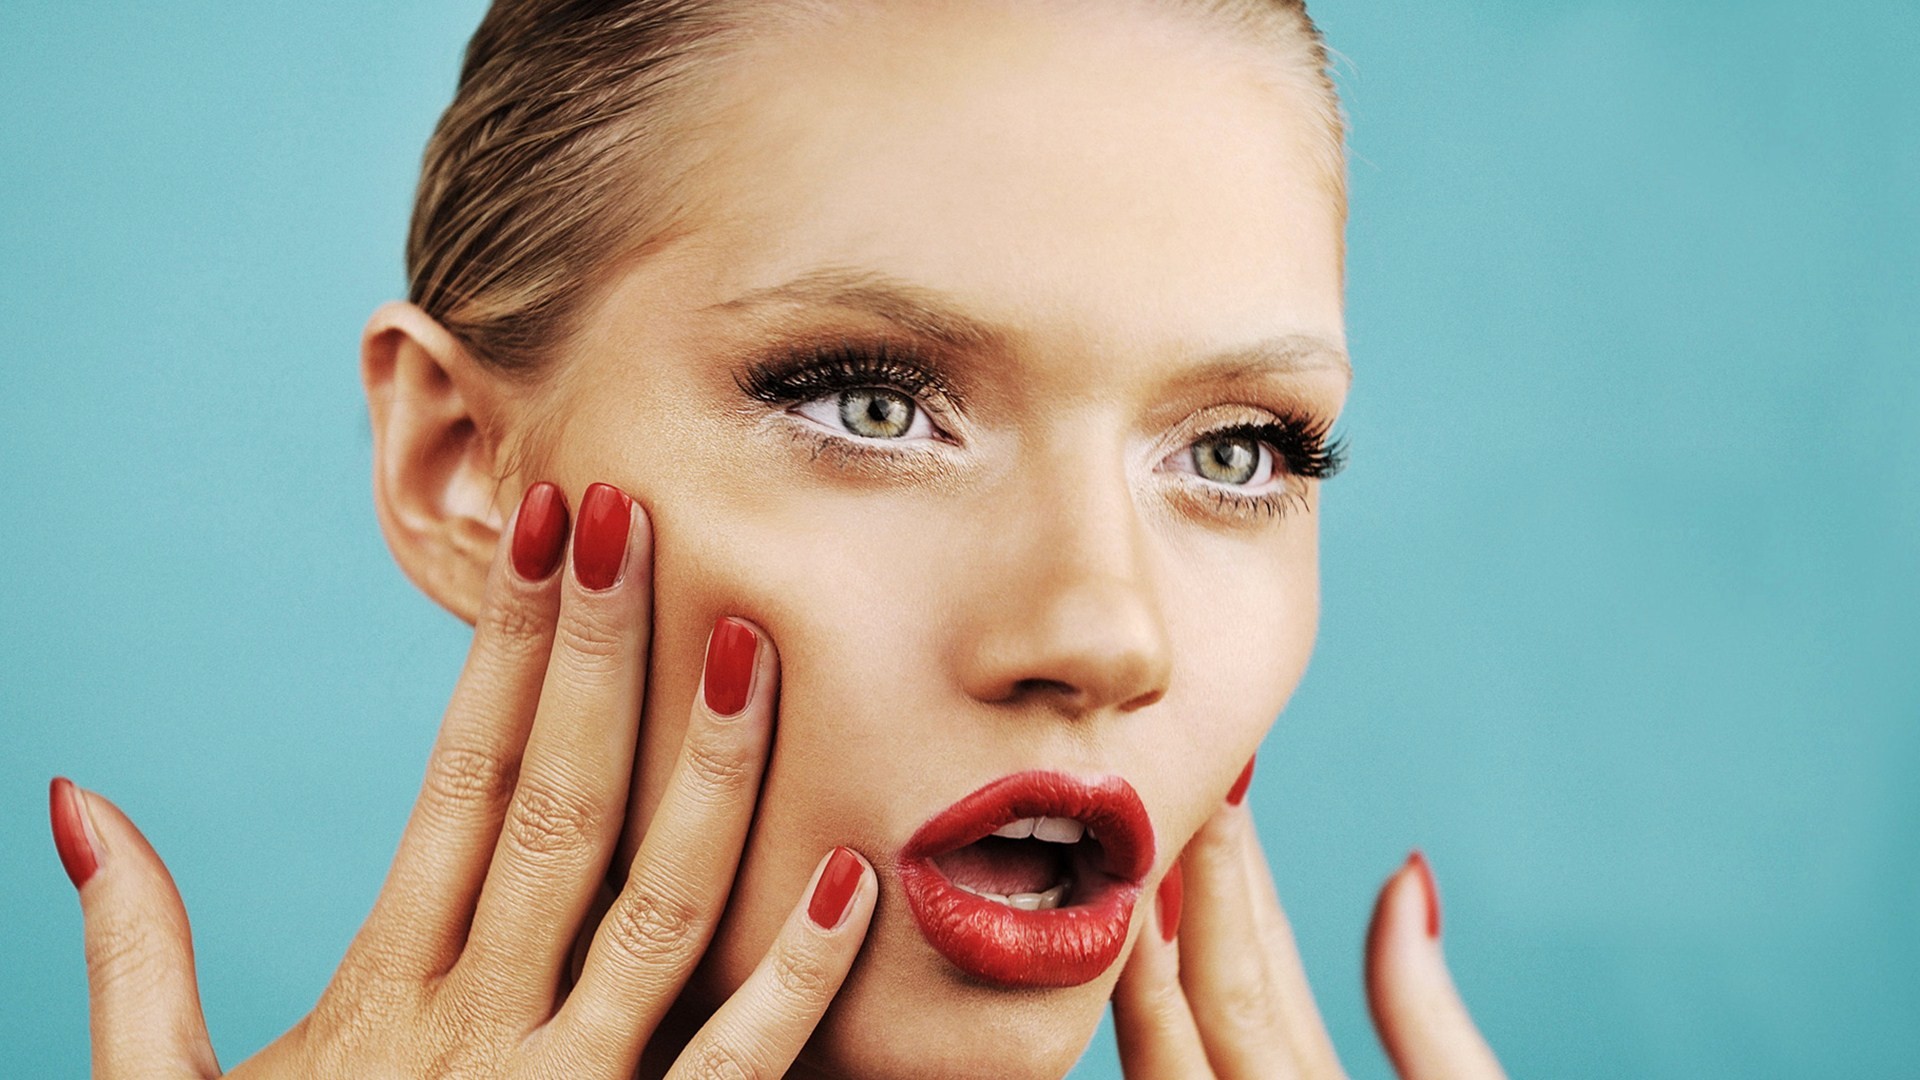 People 1920x1080 women blonde face model green eyes red lipstick red nails painted nails colored nails Martina Dimitrova simple background open mouth lipstick makeup